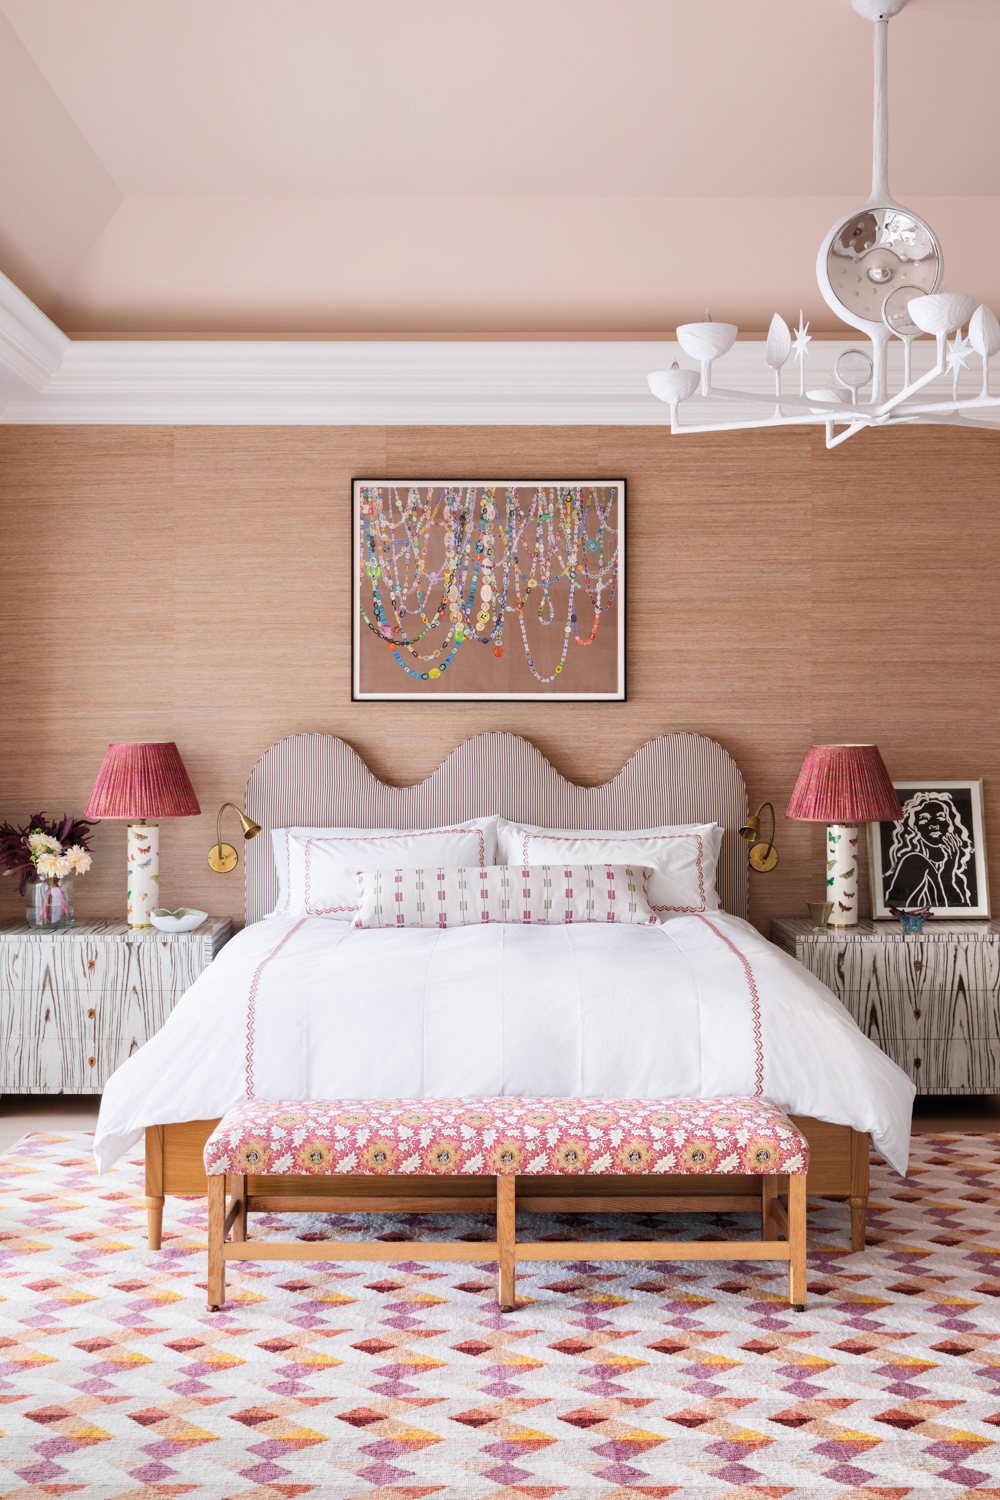 Pink Barbiecore interior design bedroom with a wave-shape headboard